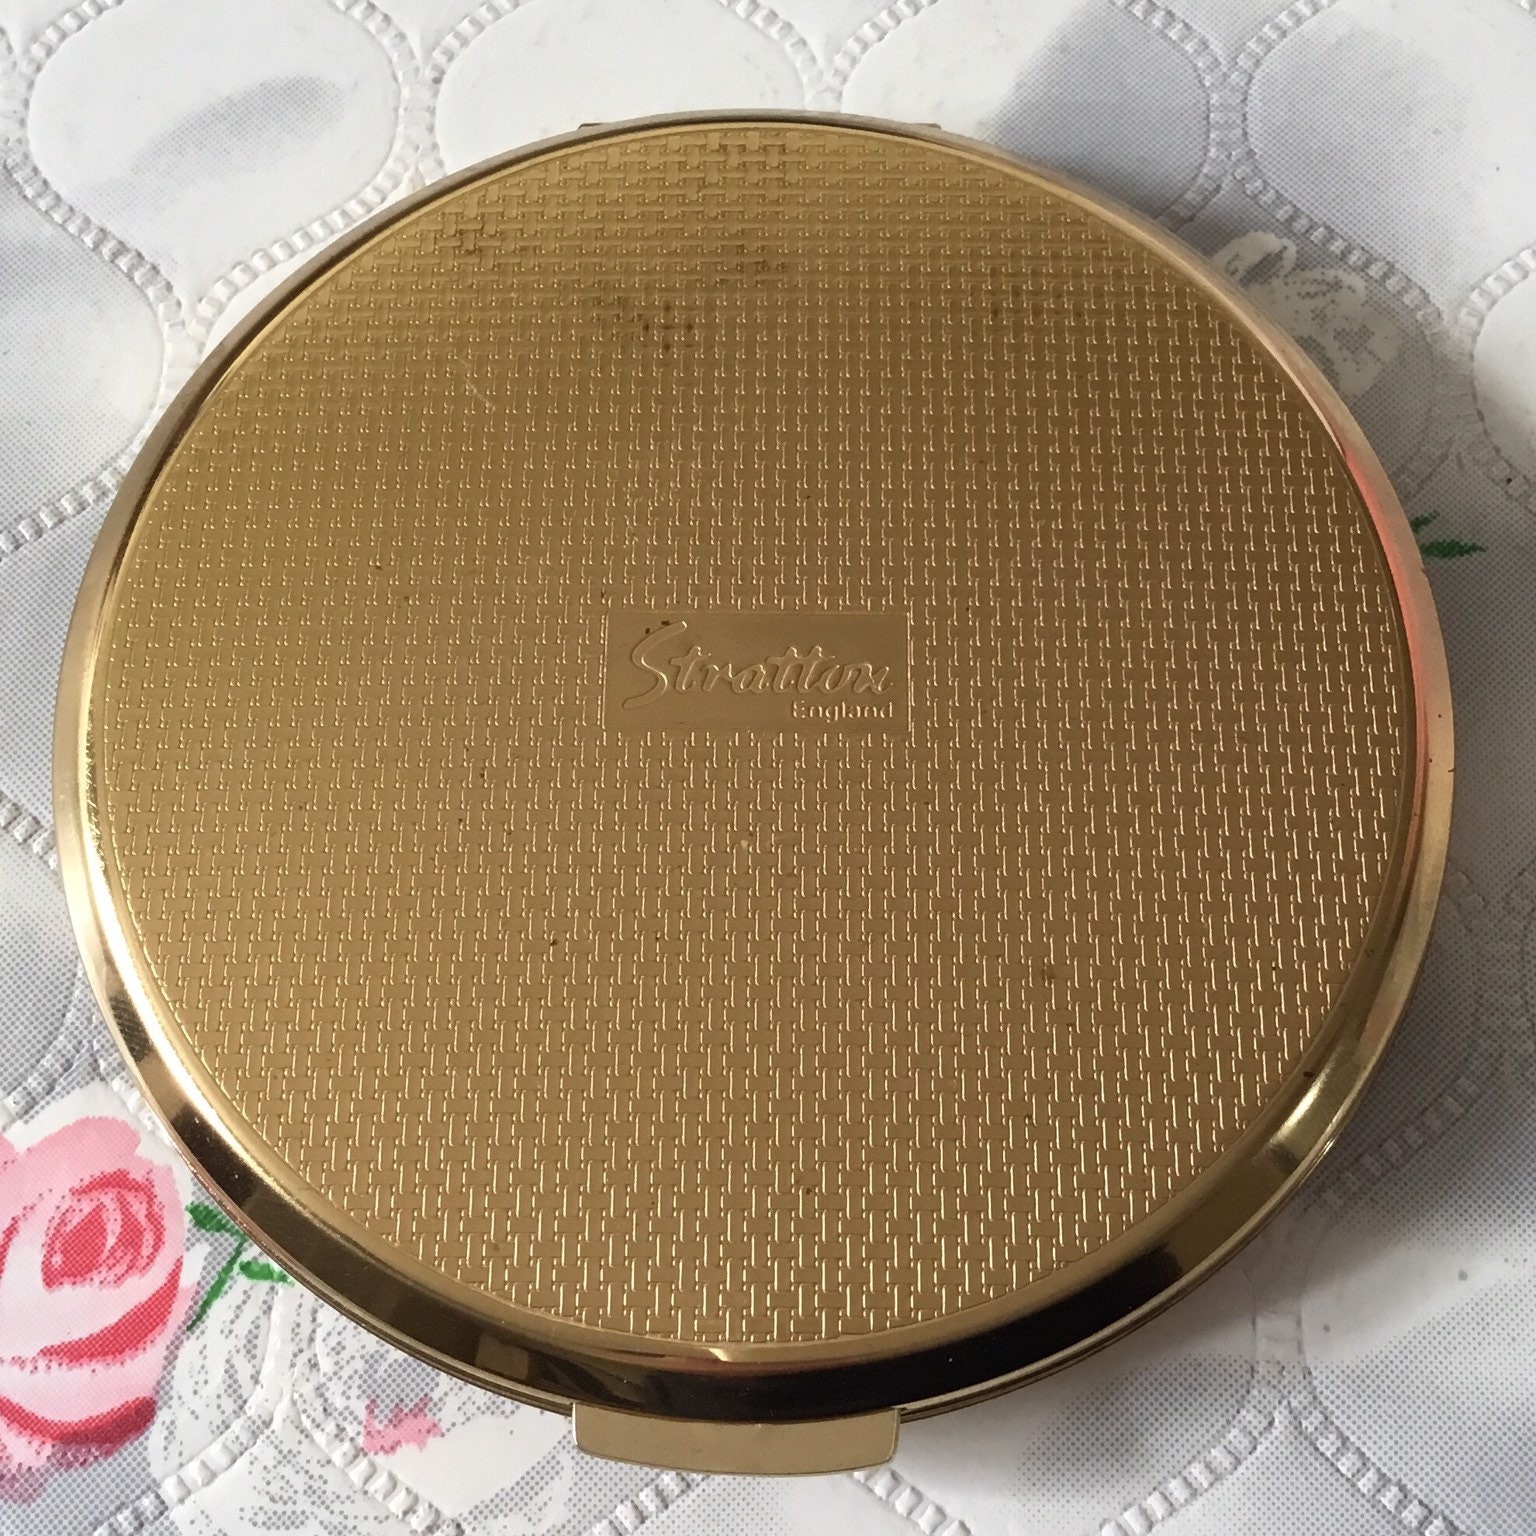 Stratton compact for loose or pressed powder with engraved ribbon bow ...